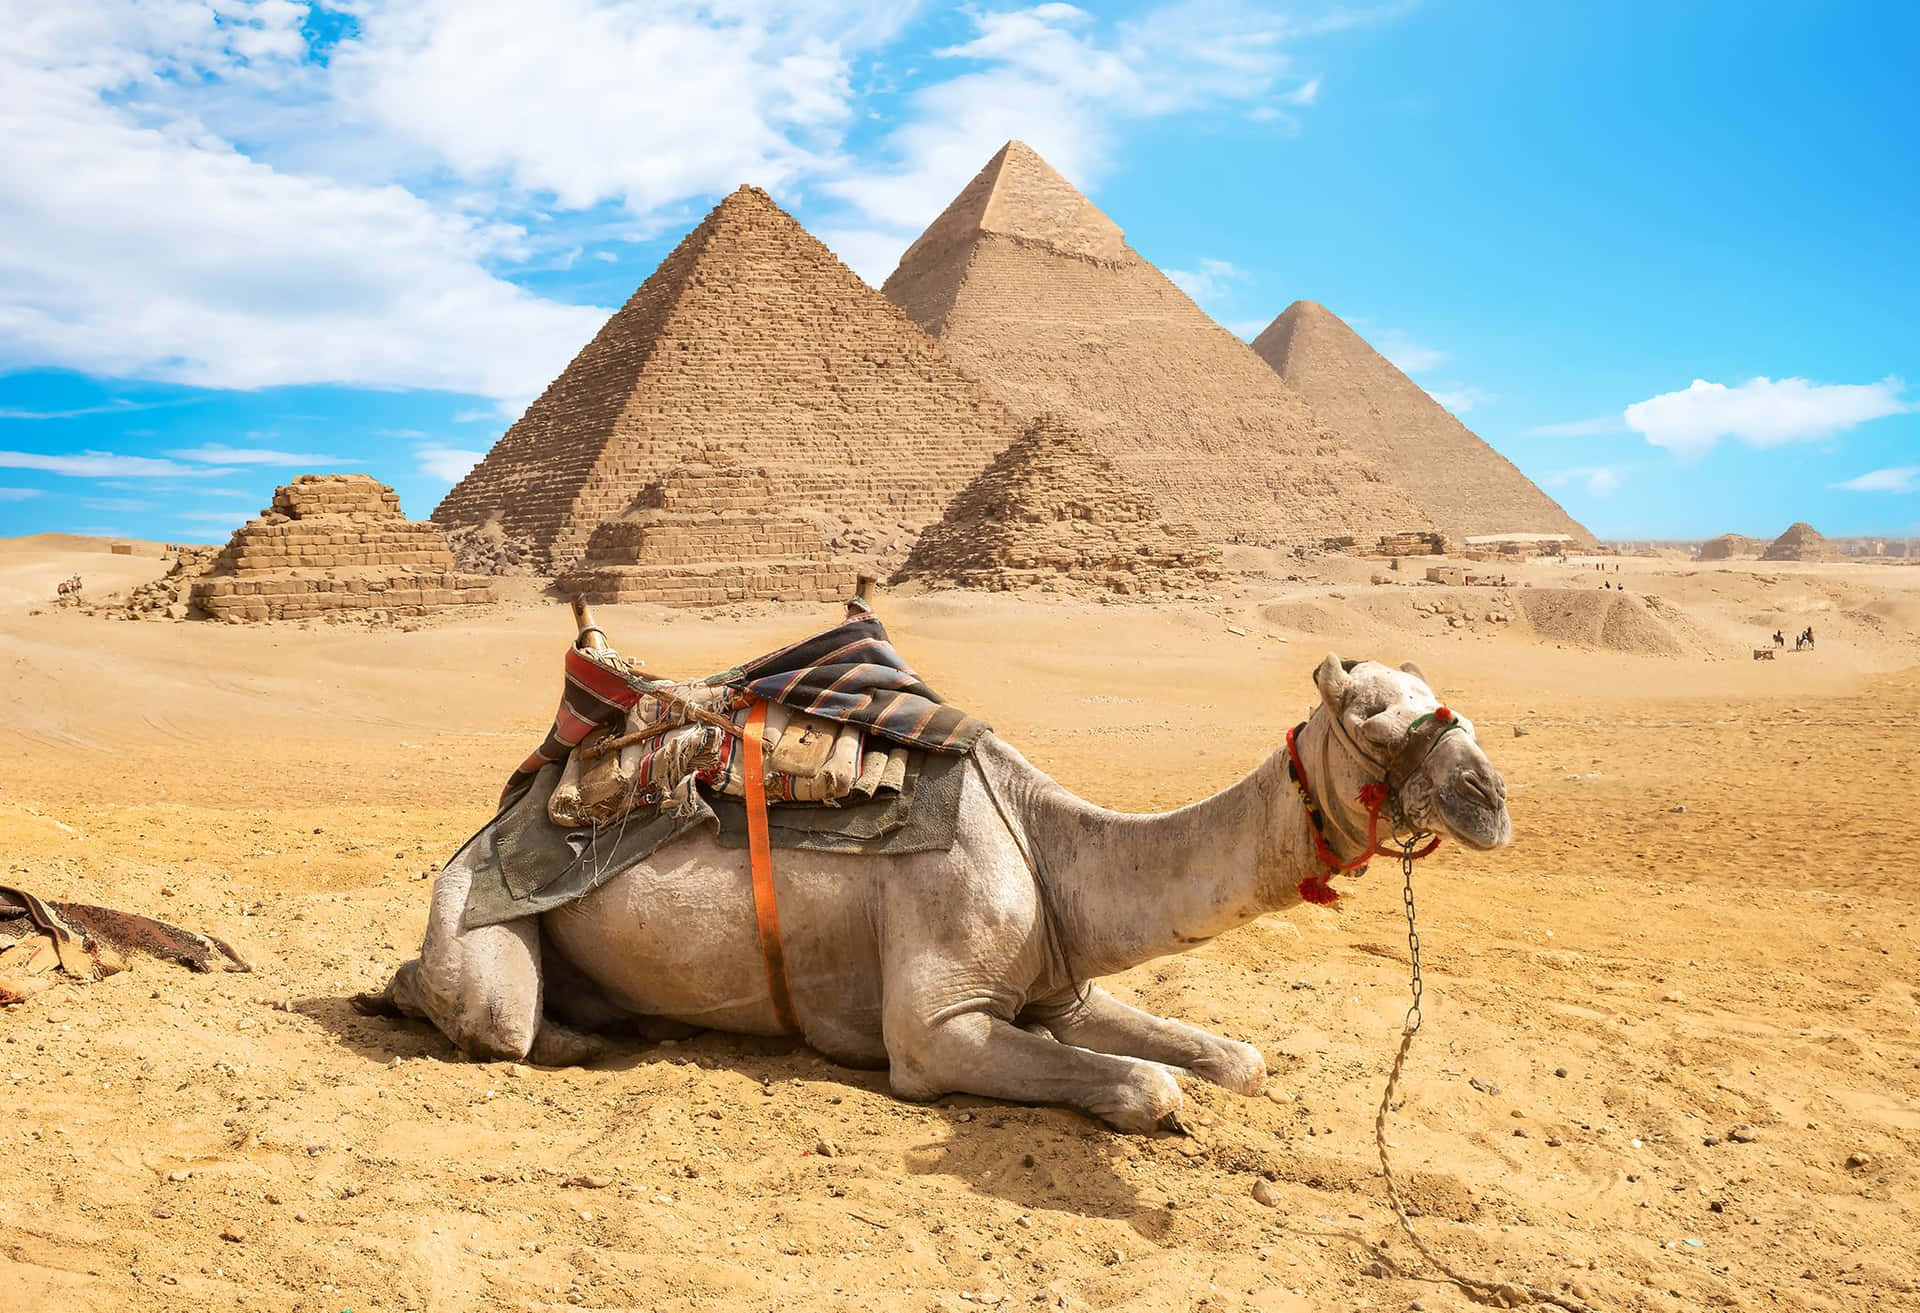 A Camel Is Sitting In The Desert Near The Pyramids